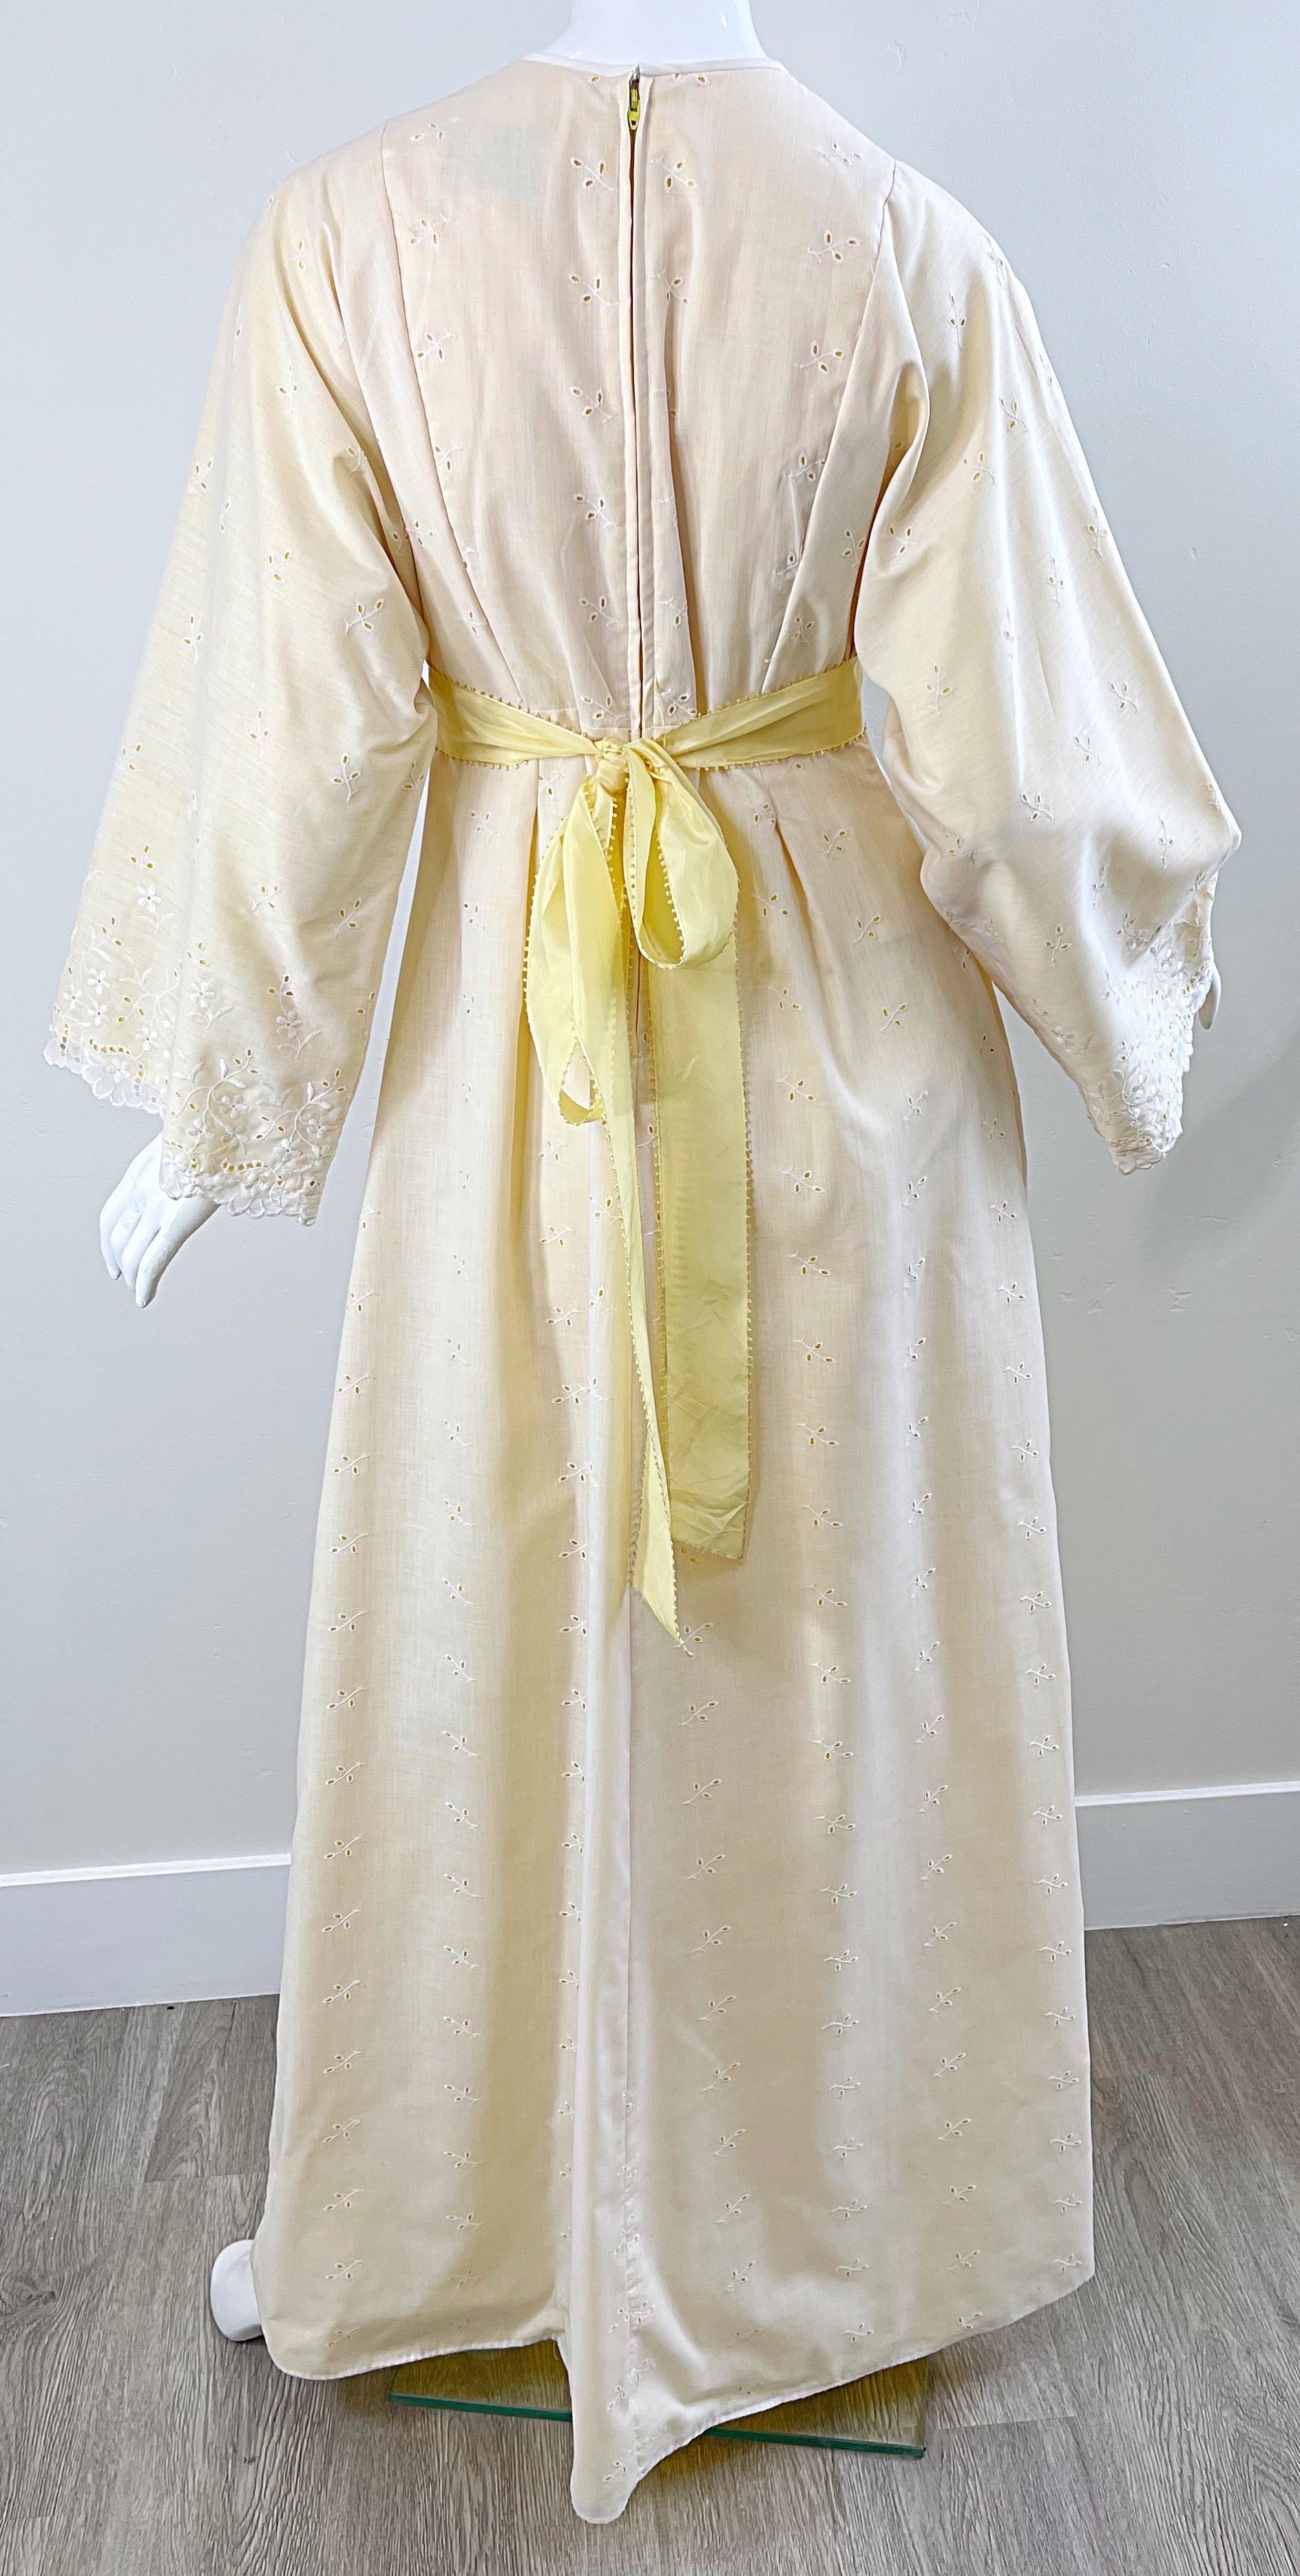 1970s Bill Tice Pale Yellow + White Cotton Eyelet Vintage 70s Maxi Dress For Sale 6